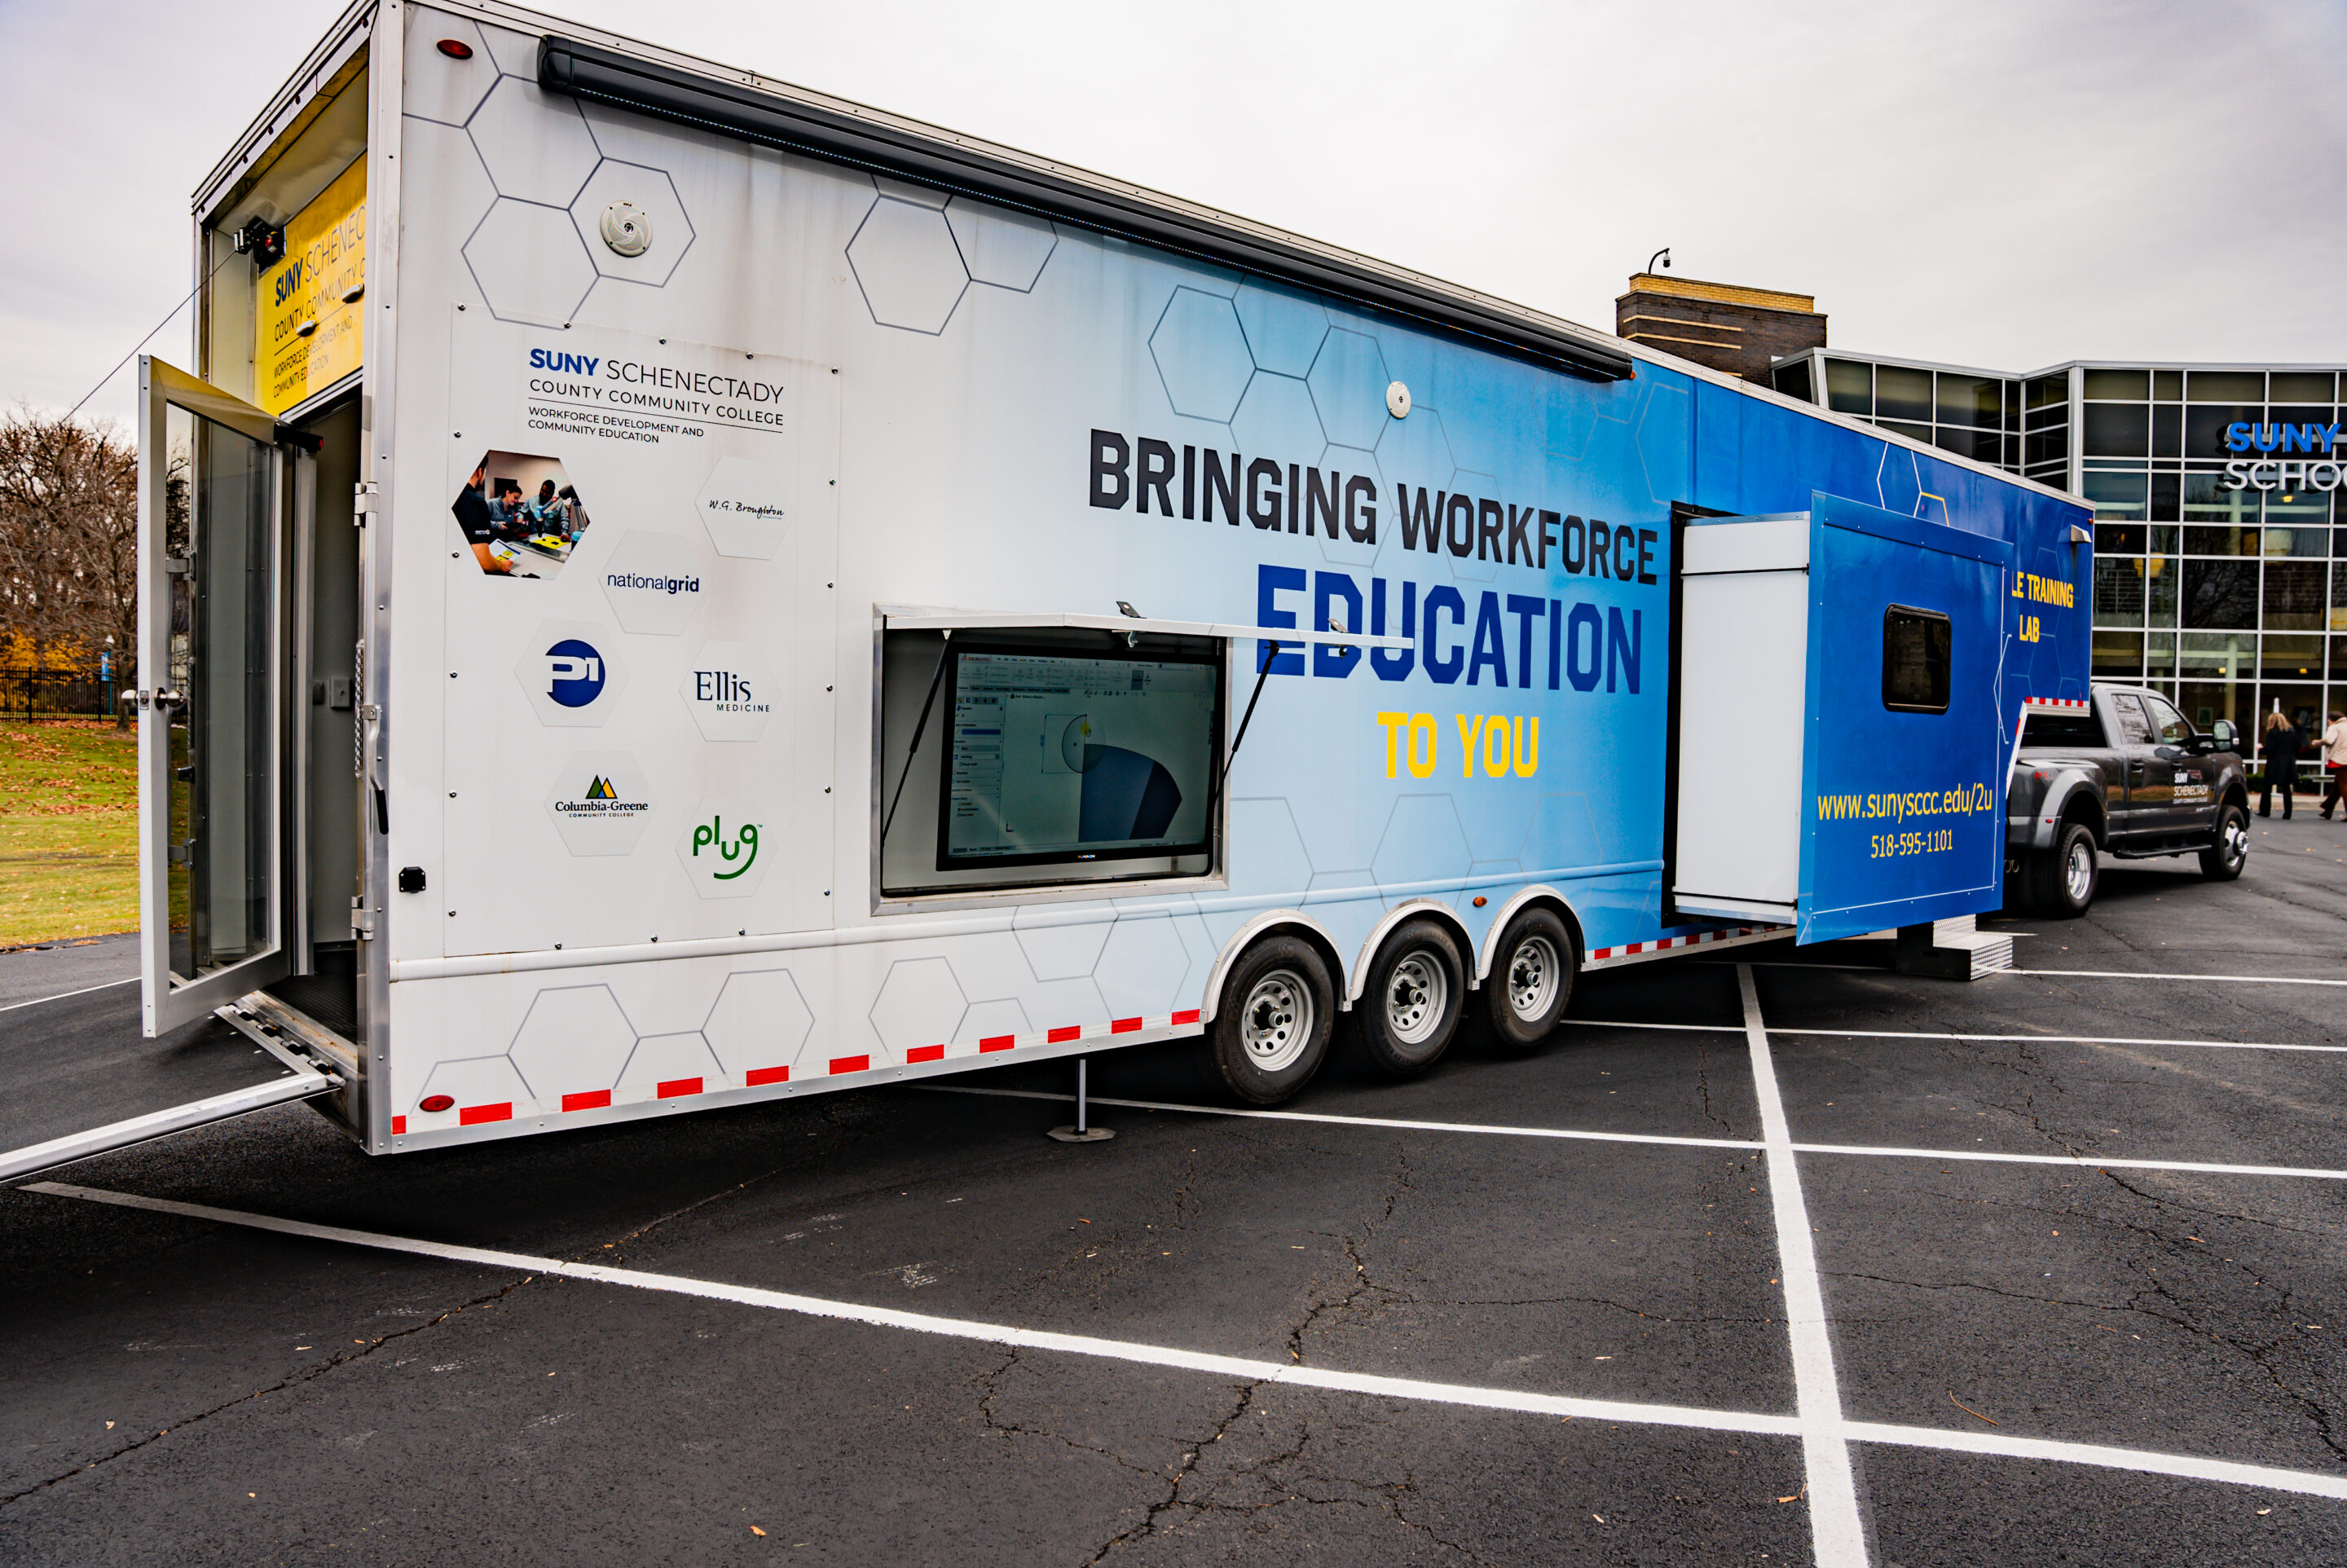 SUNY Schenectady’s New Mobile Training Labs Will Bring Customized Advanced Manufacturing and Healthcare Training Directly to Companies and Organizations